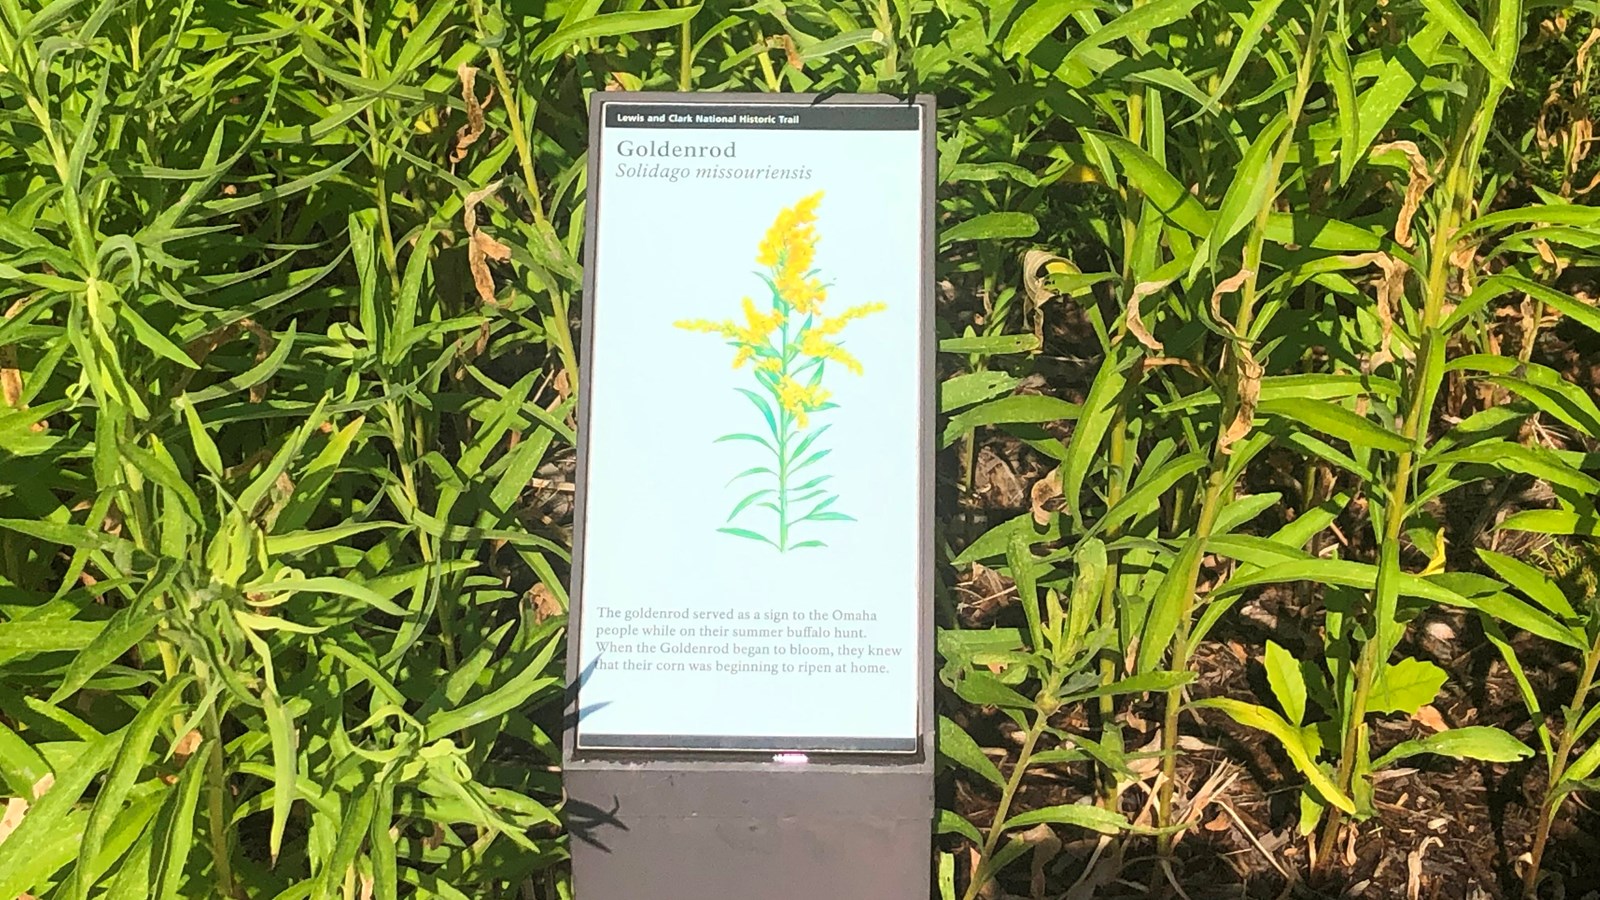 A small sign is placed near a green plant. The sign describes the Goldenrod. 